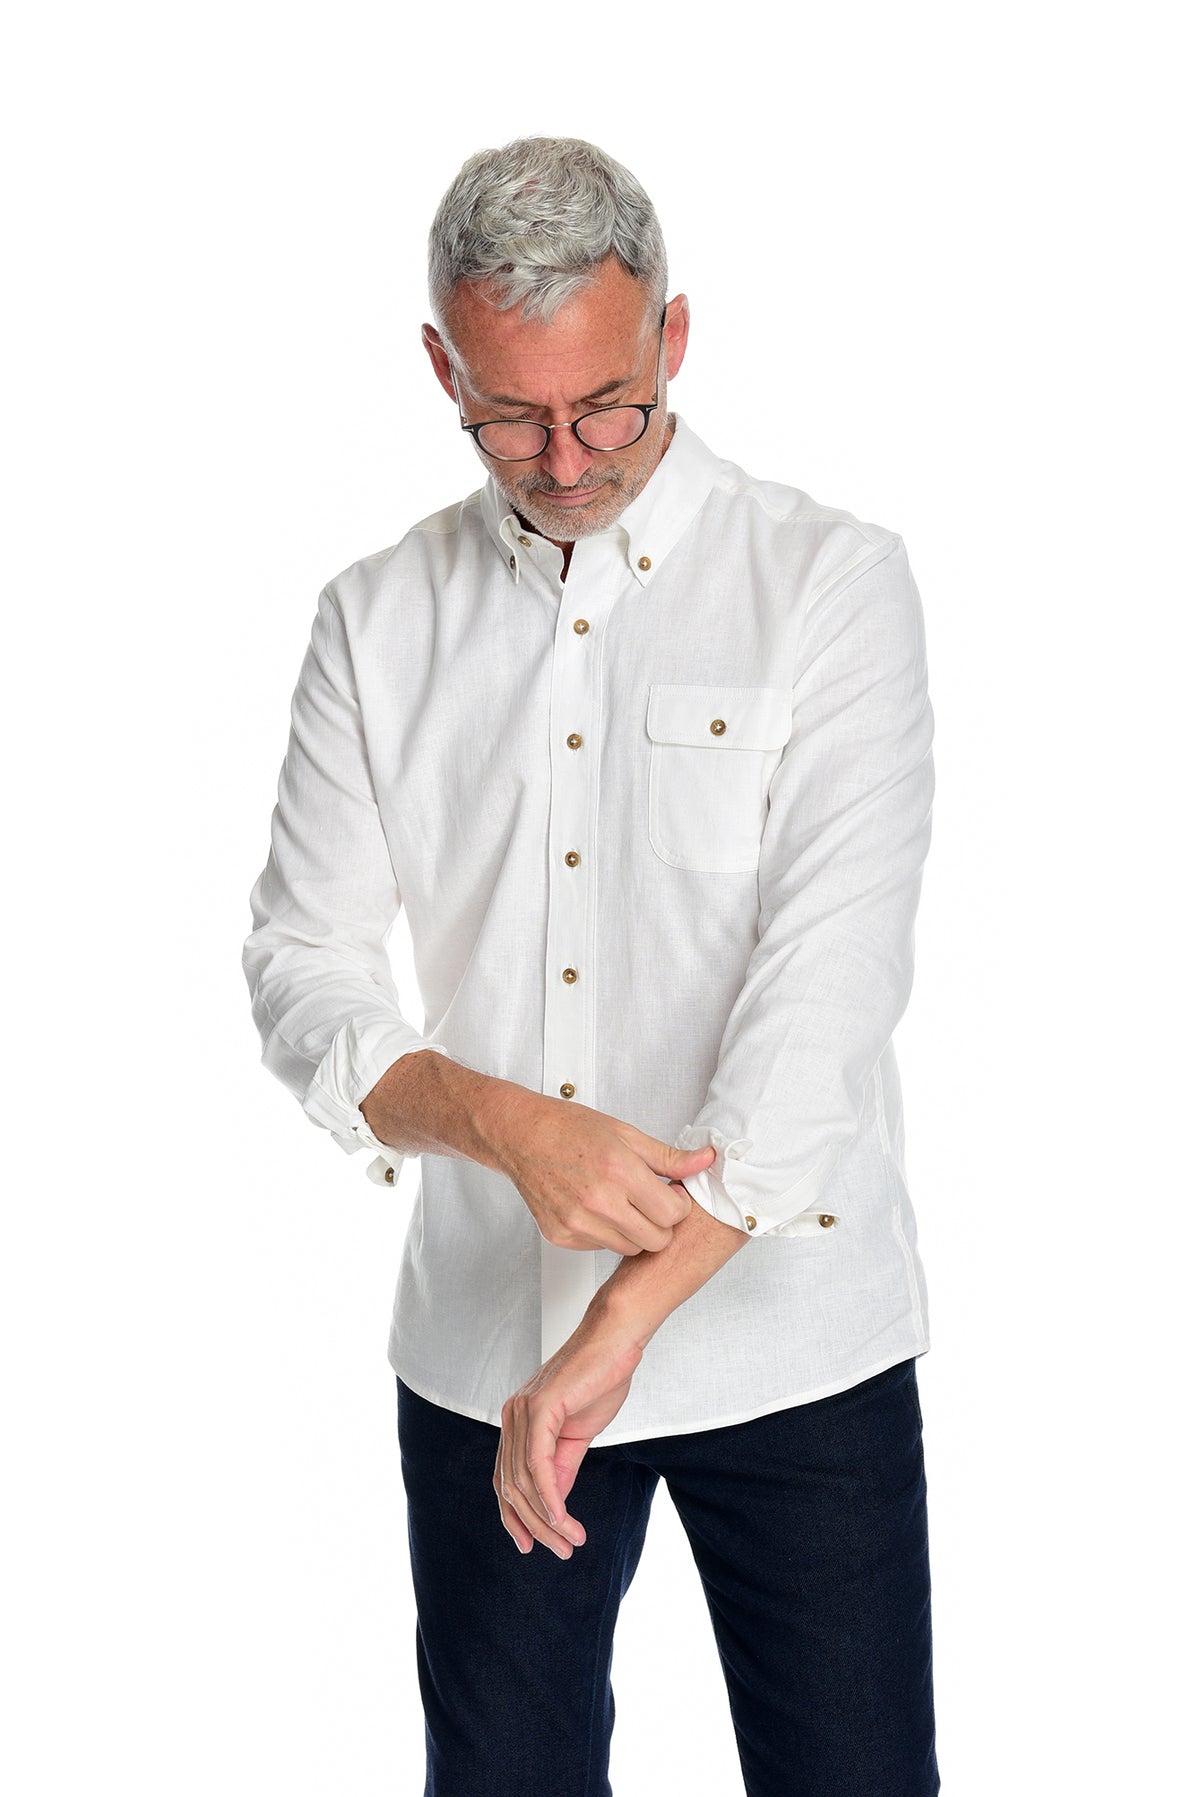 Men&#39;s Long Sleeve Button Down Shirt the Bastille Shirt Rolled Up Cuffs by Fisher + Baker White Button Down Collar